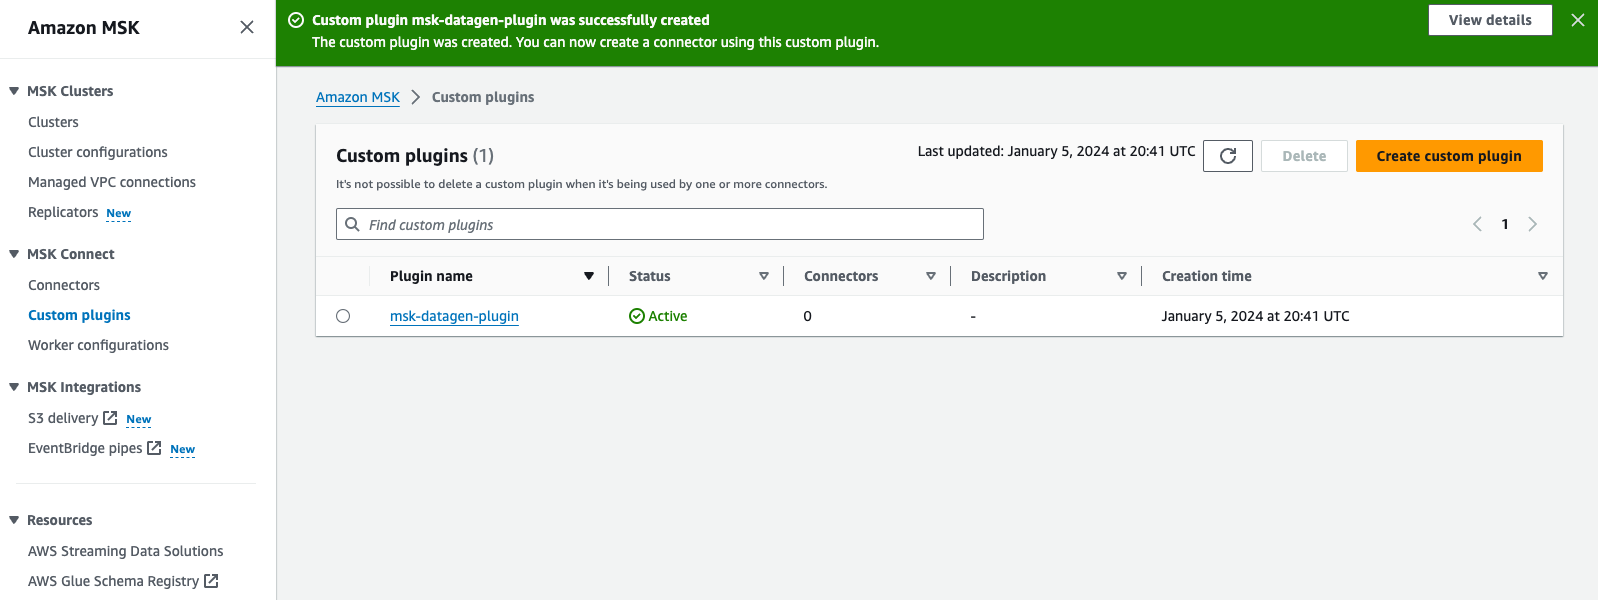 amazon msk console showing the msk connect custom plugin being successfully created